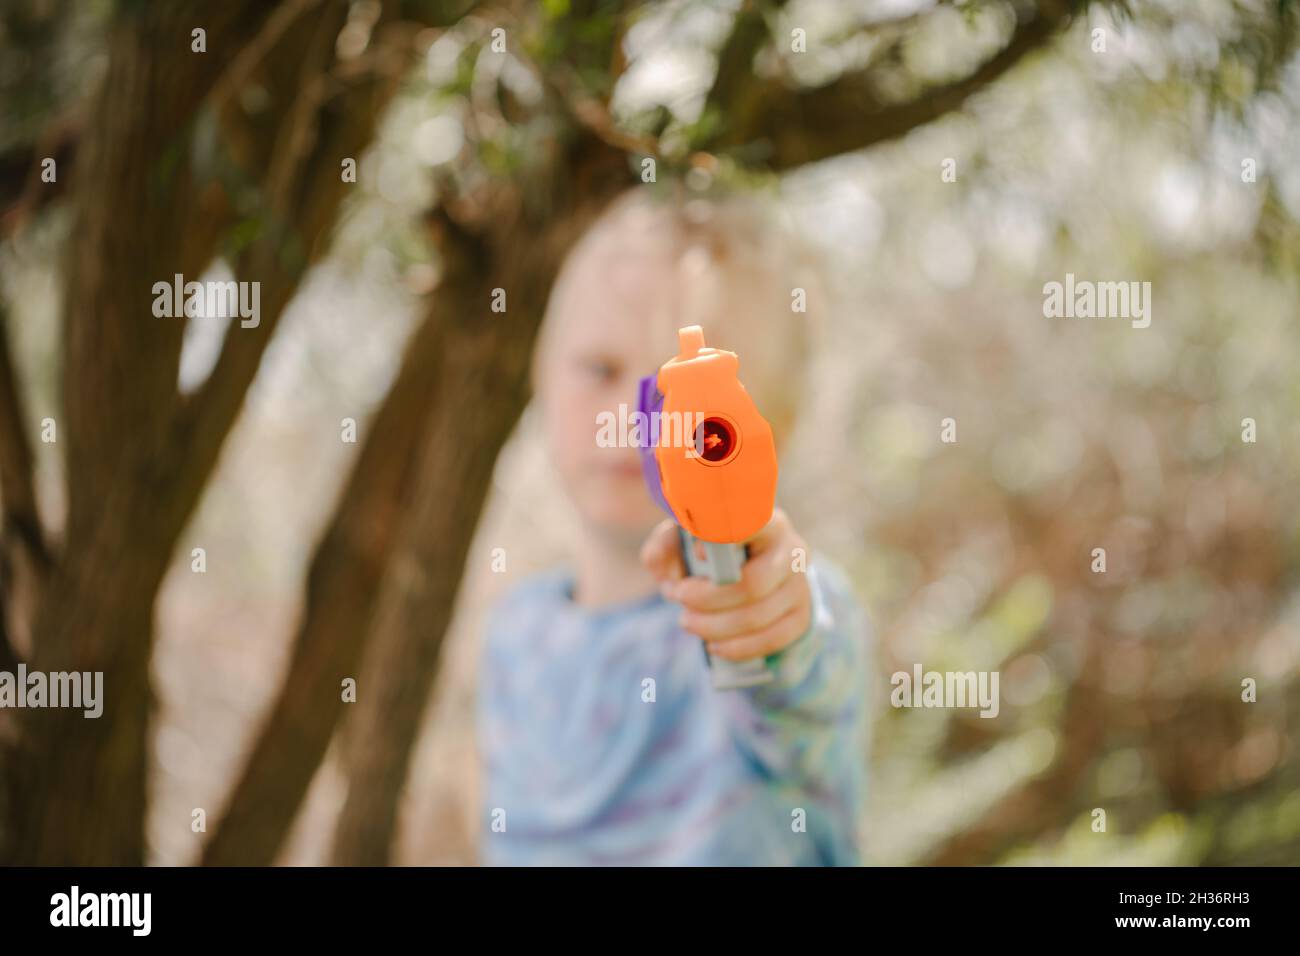 Boy holding toy nerf gun directly in front obscuring his face Stock Photo